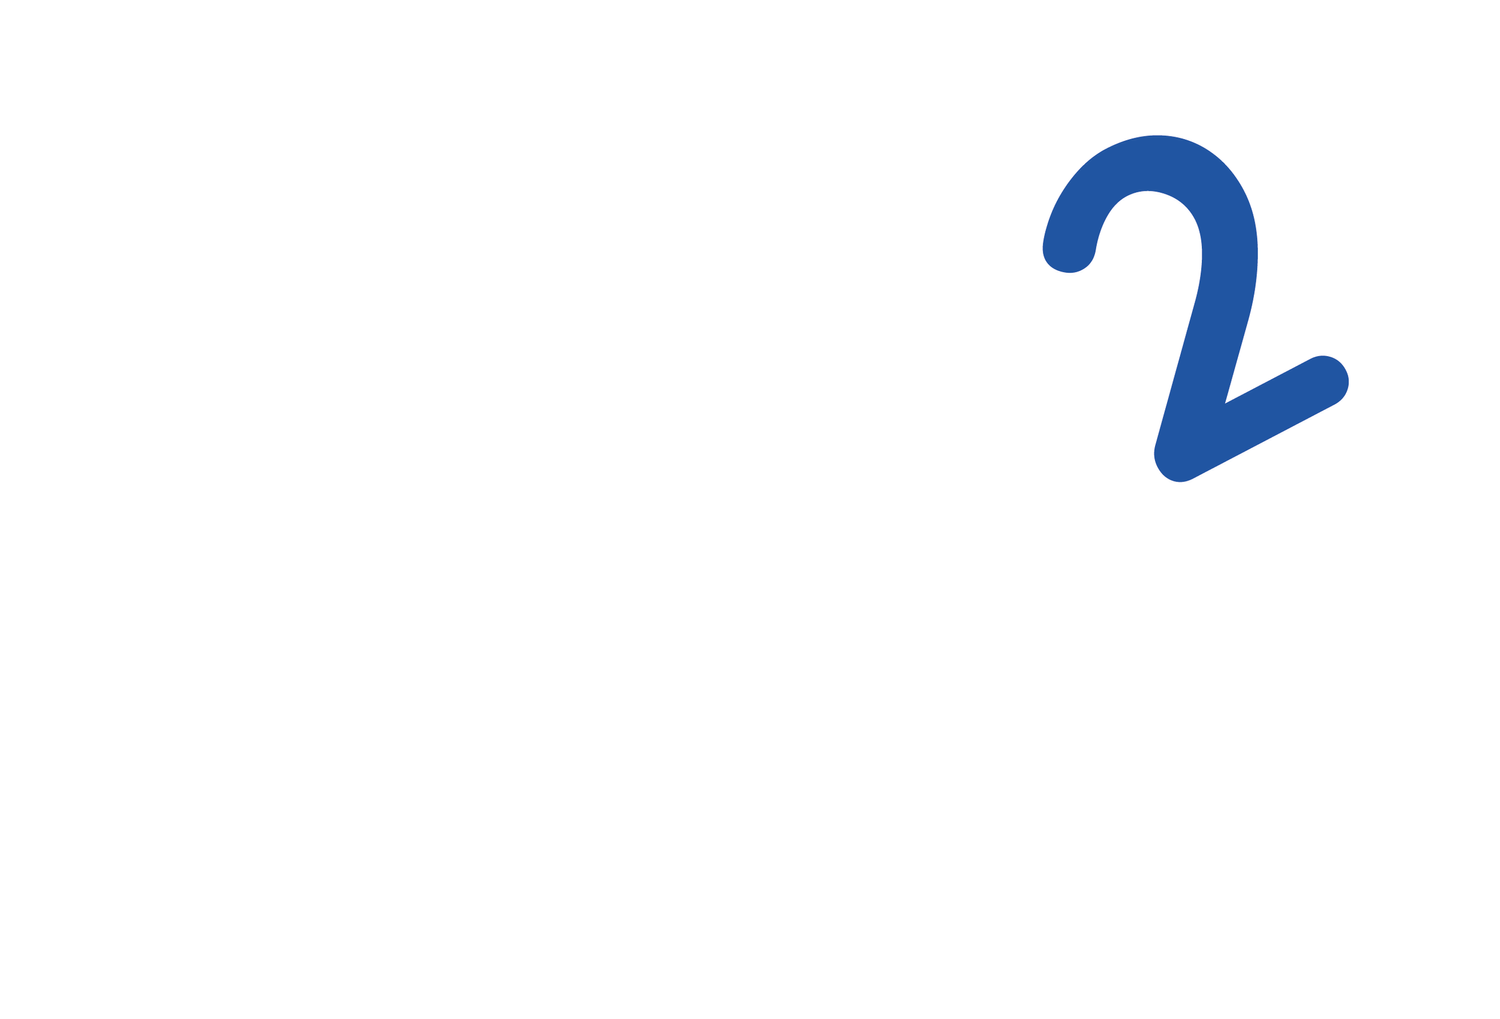 Launch2Learning